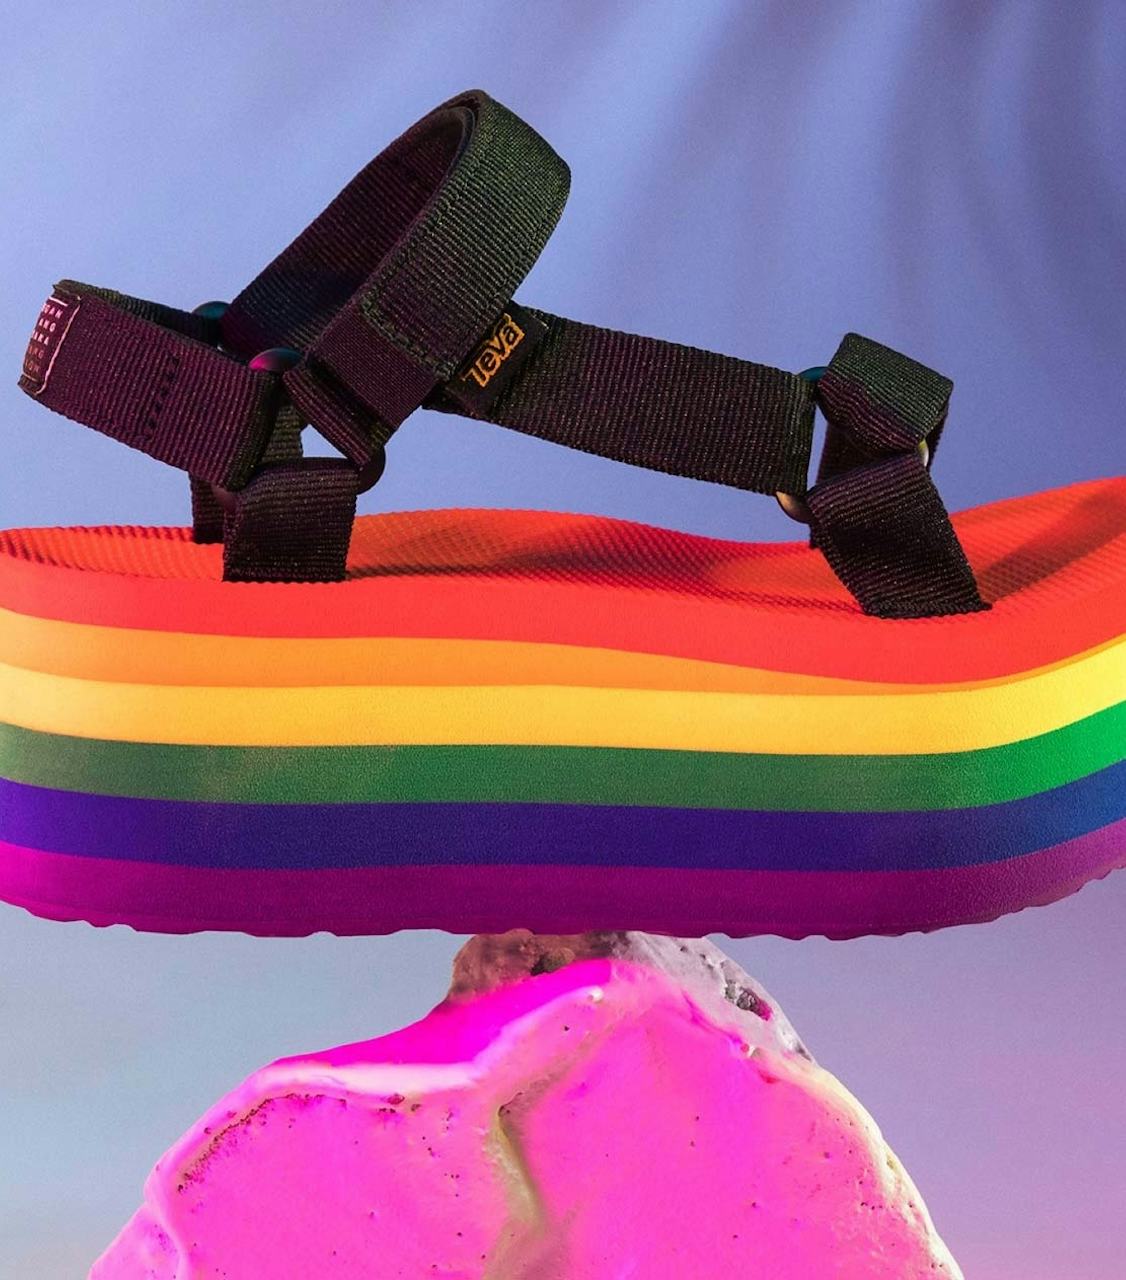 Teva Teamed Up With Tegan & Sara For The Ultimate Pride Shoe